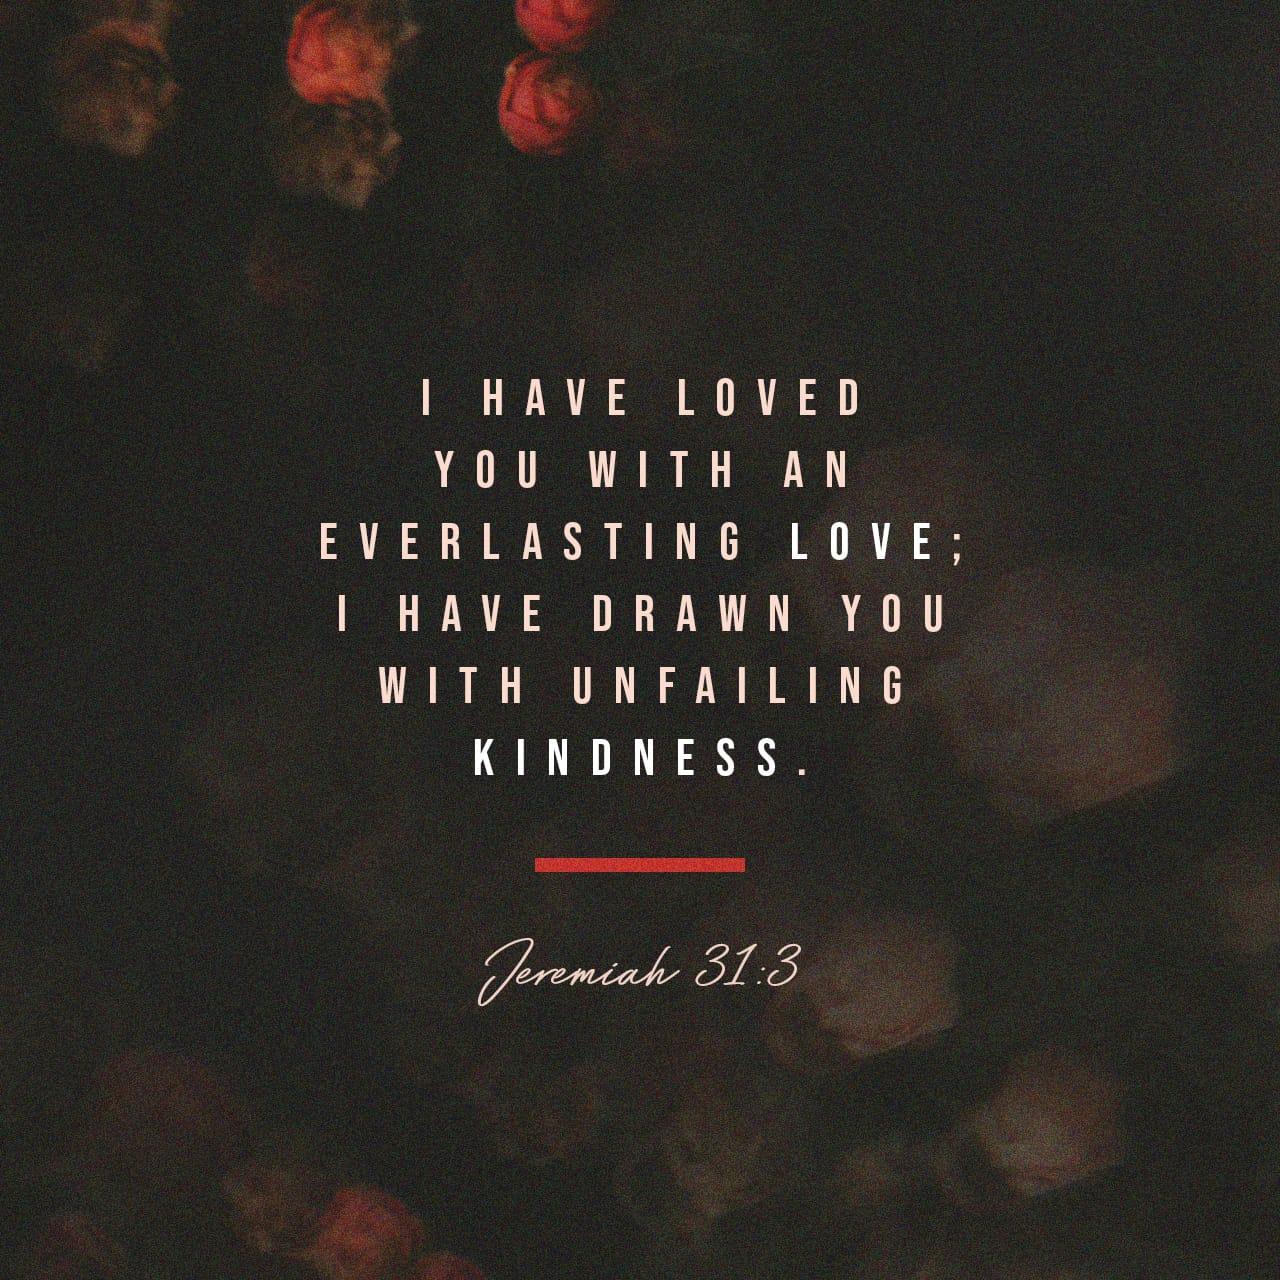 Bible Verse of the Day - day 152 - image 36058 (Jeremiah 31:1-19)